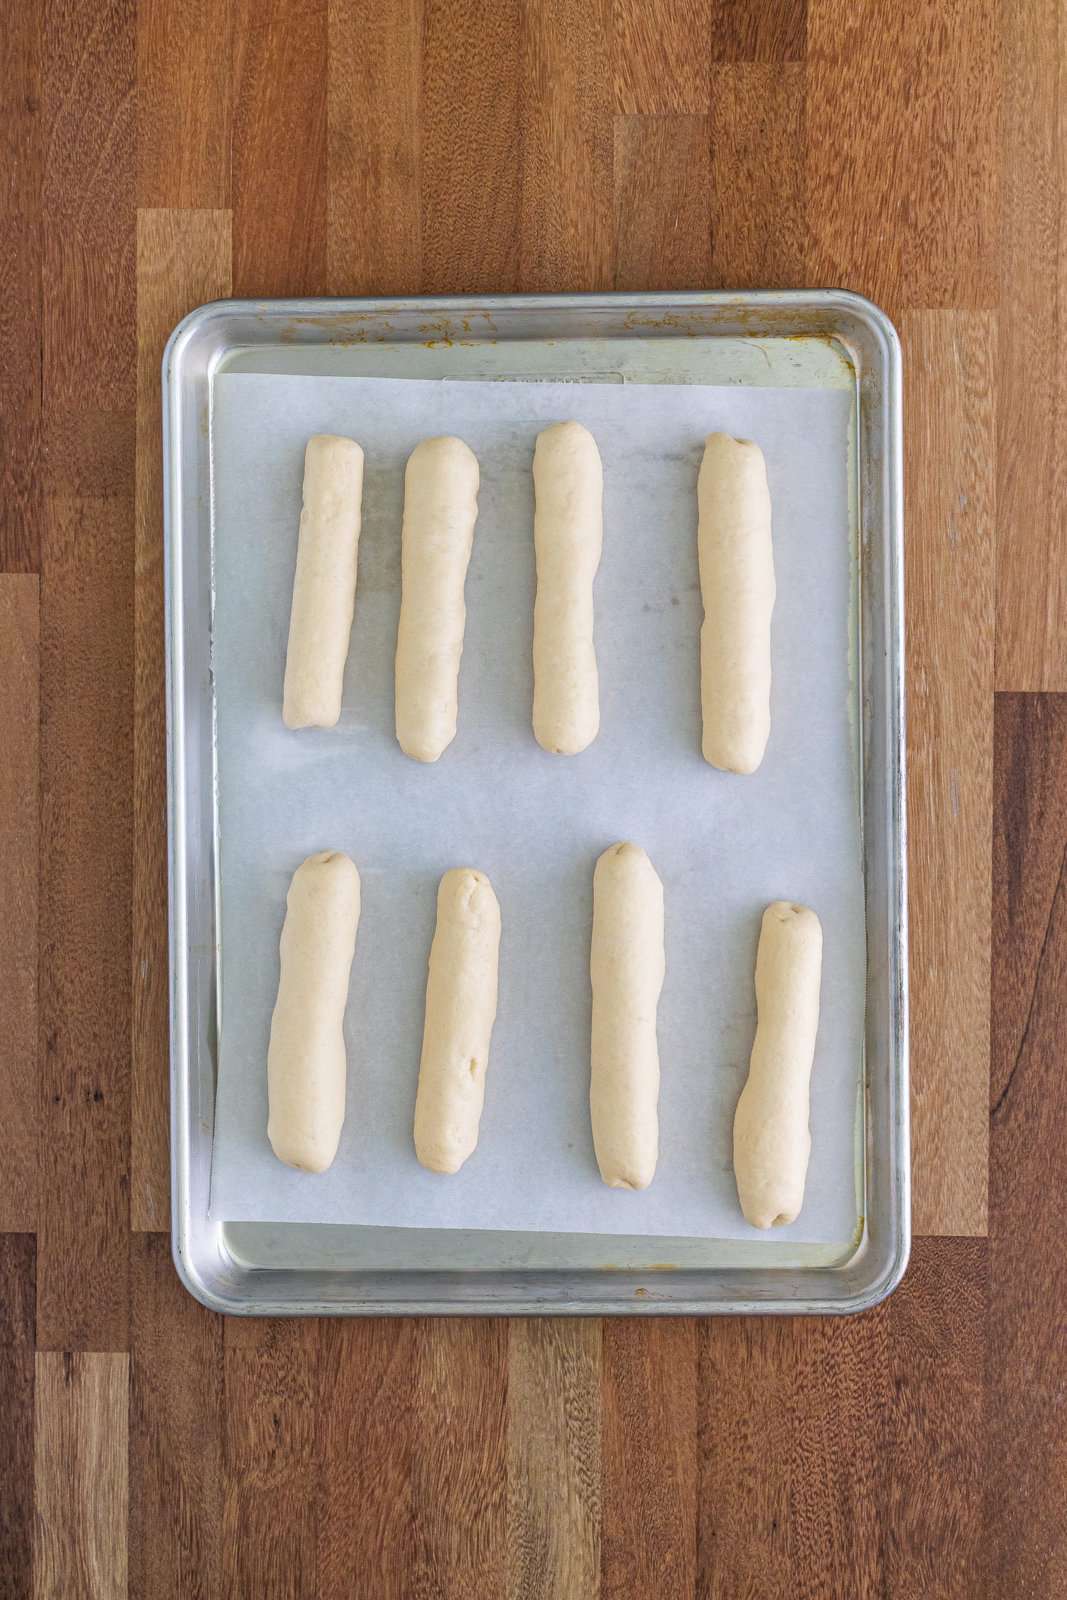 A baking sheet lined with parchment paper and Bosco sticks rolled up covered in dough.